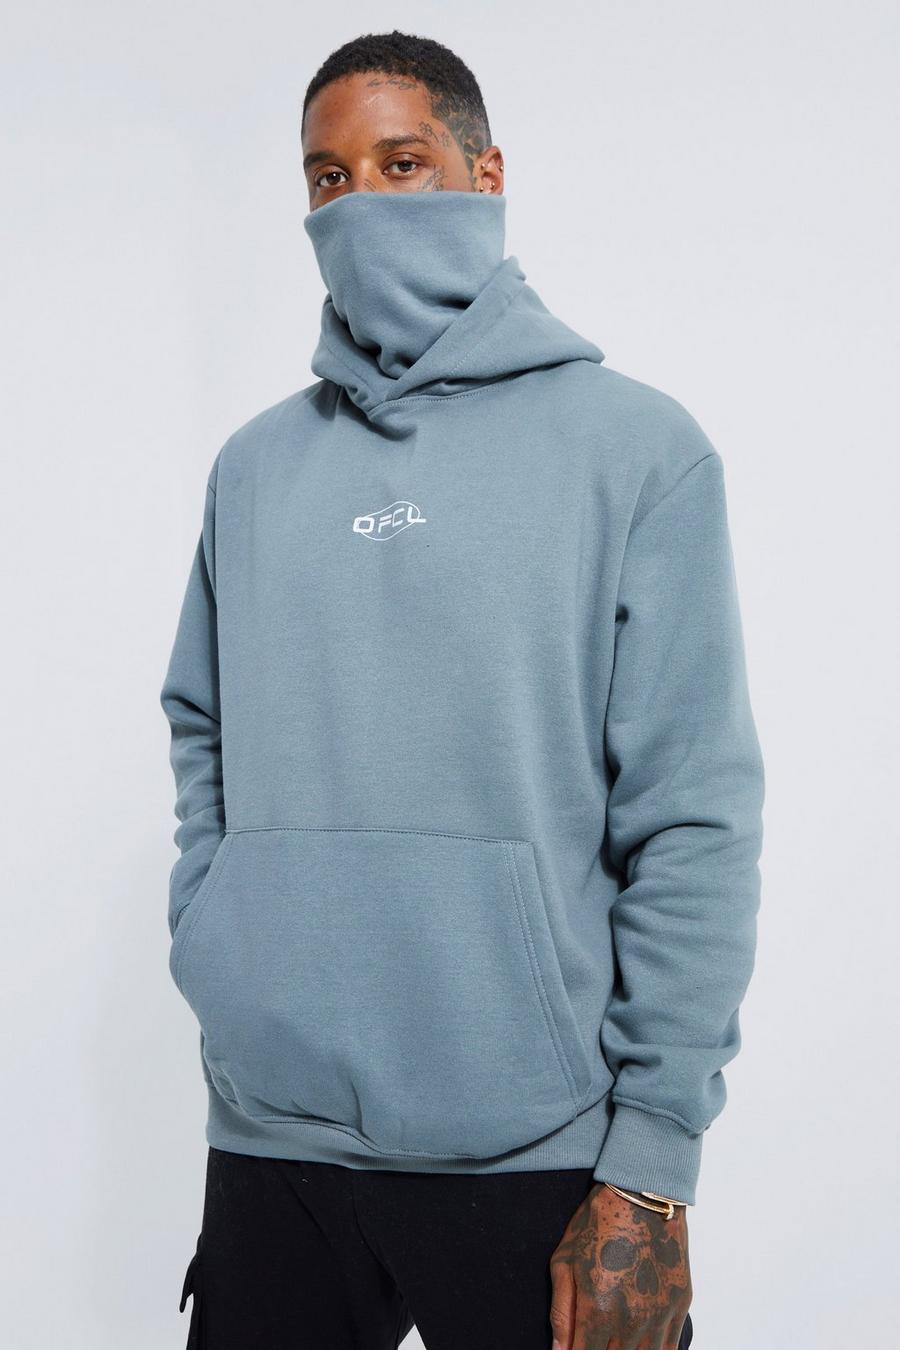 Slate blue Oversized Ofcl Graphic Hoodie With Snood image number 1